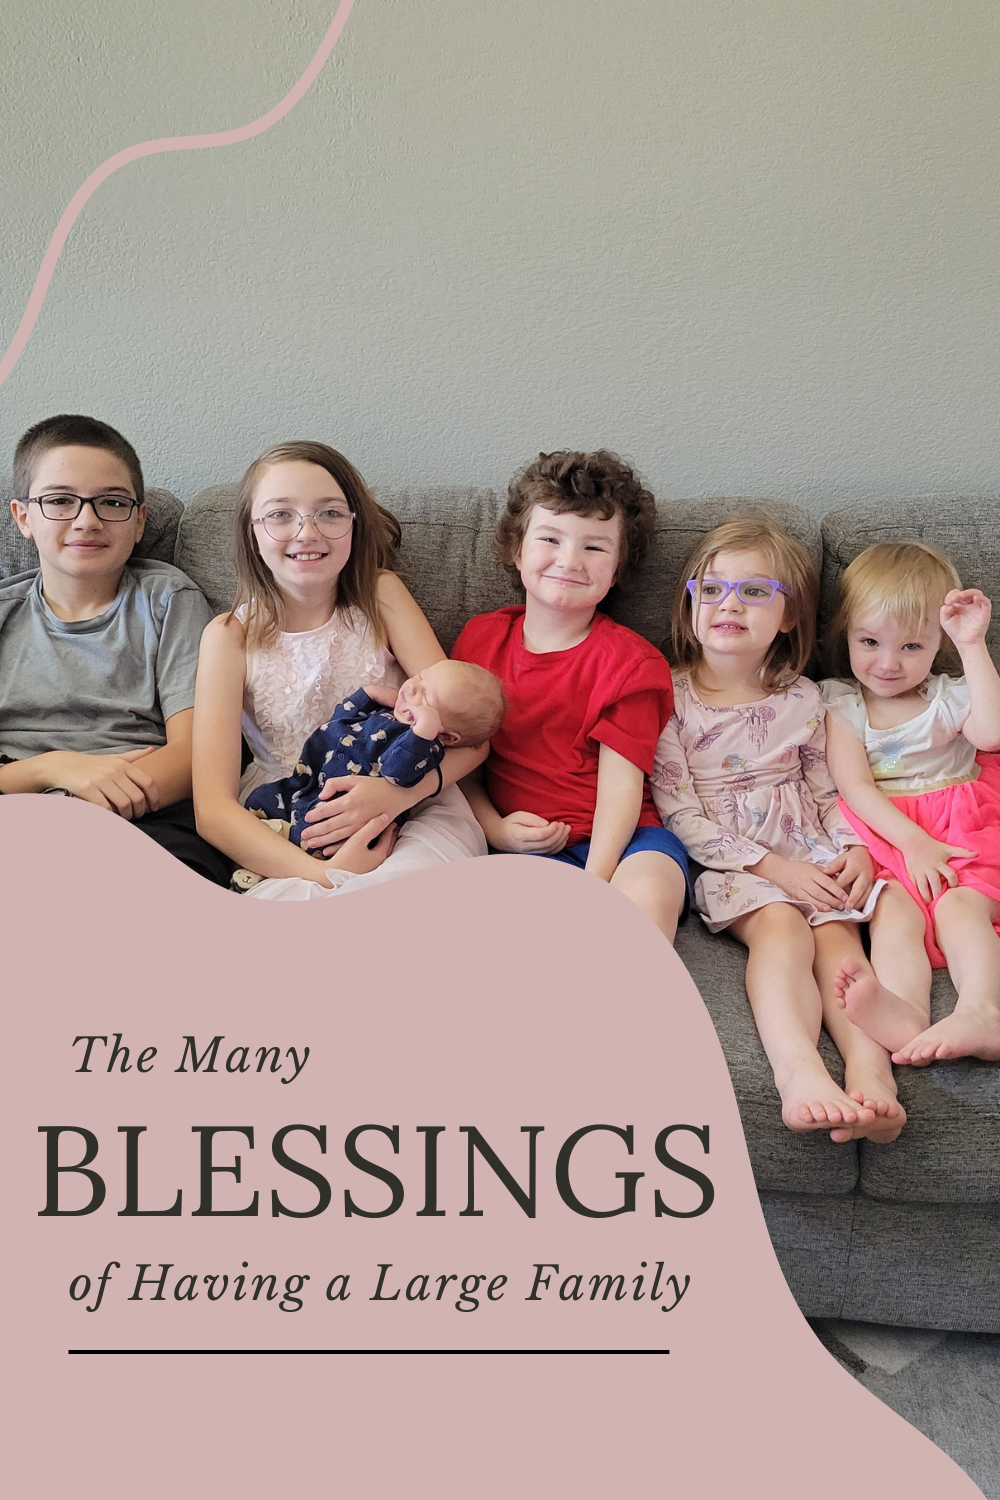 The blessing of having a large family